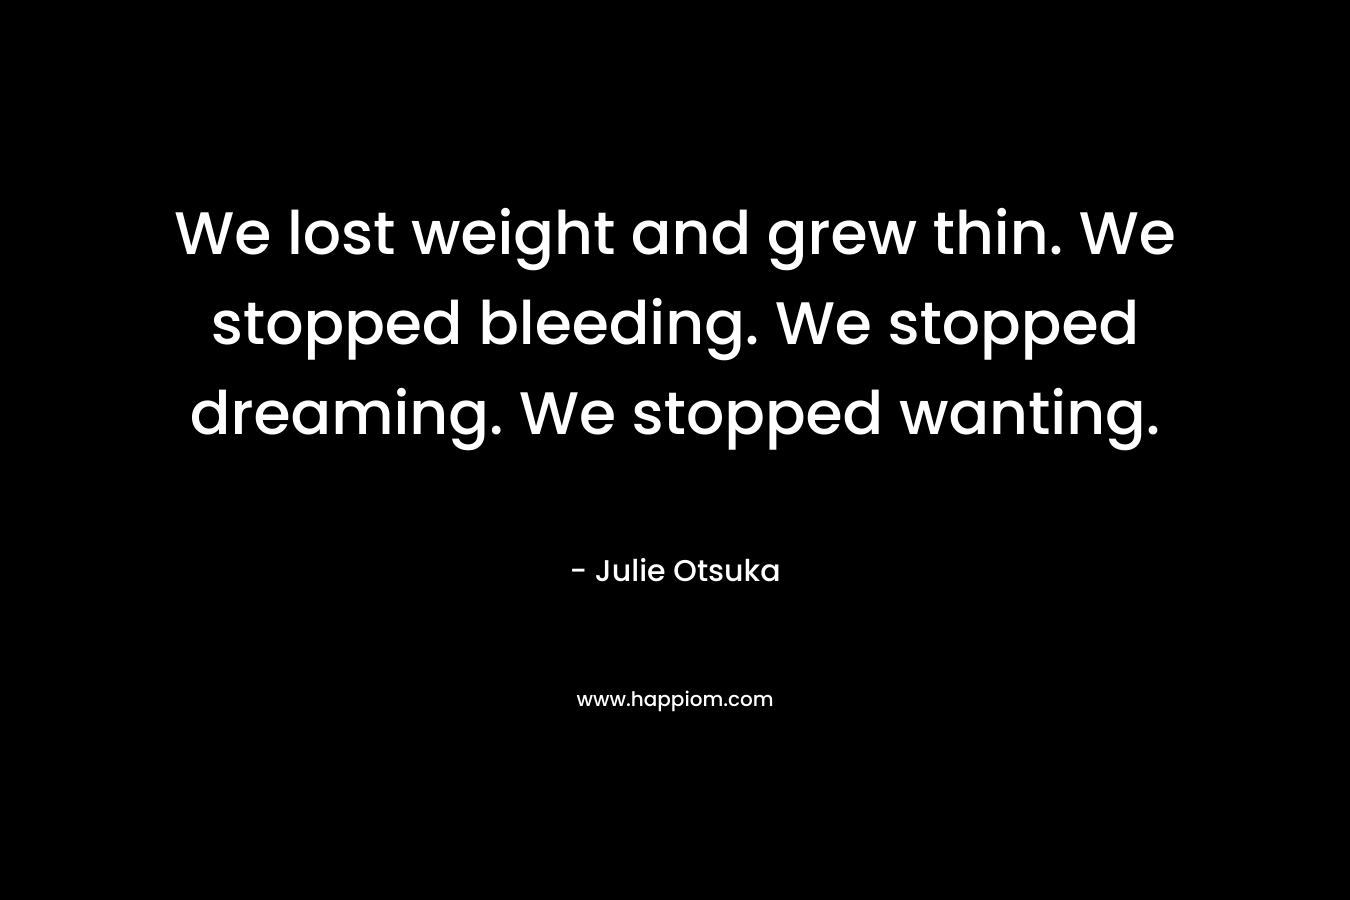 We lost weight and grew thin. We stopped bleeding. We stopped dreaming. We stopped wanting. – Julie Otsuka